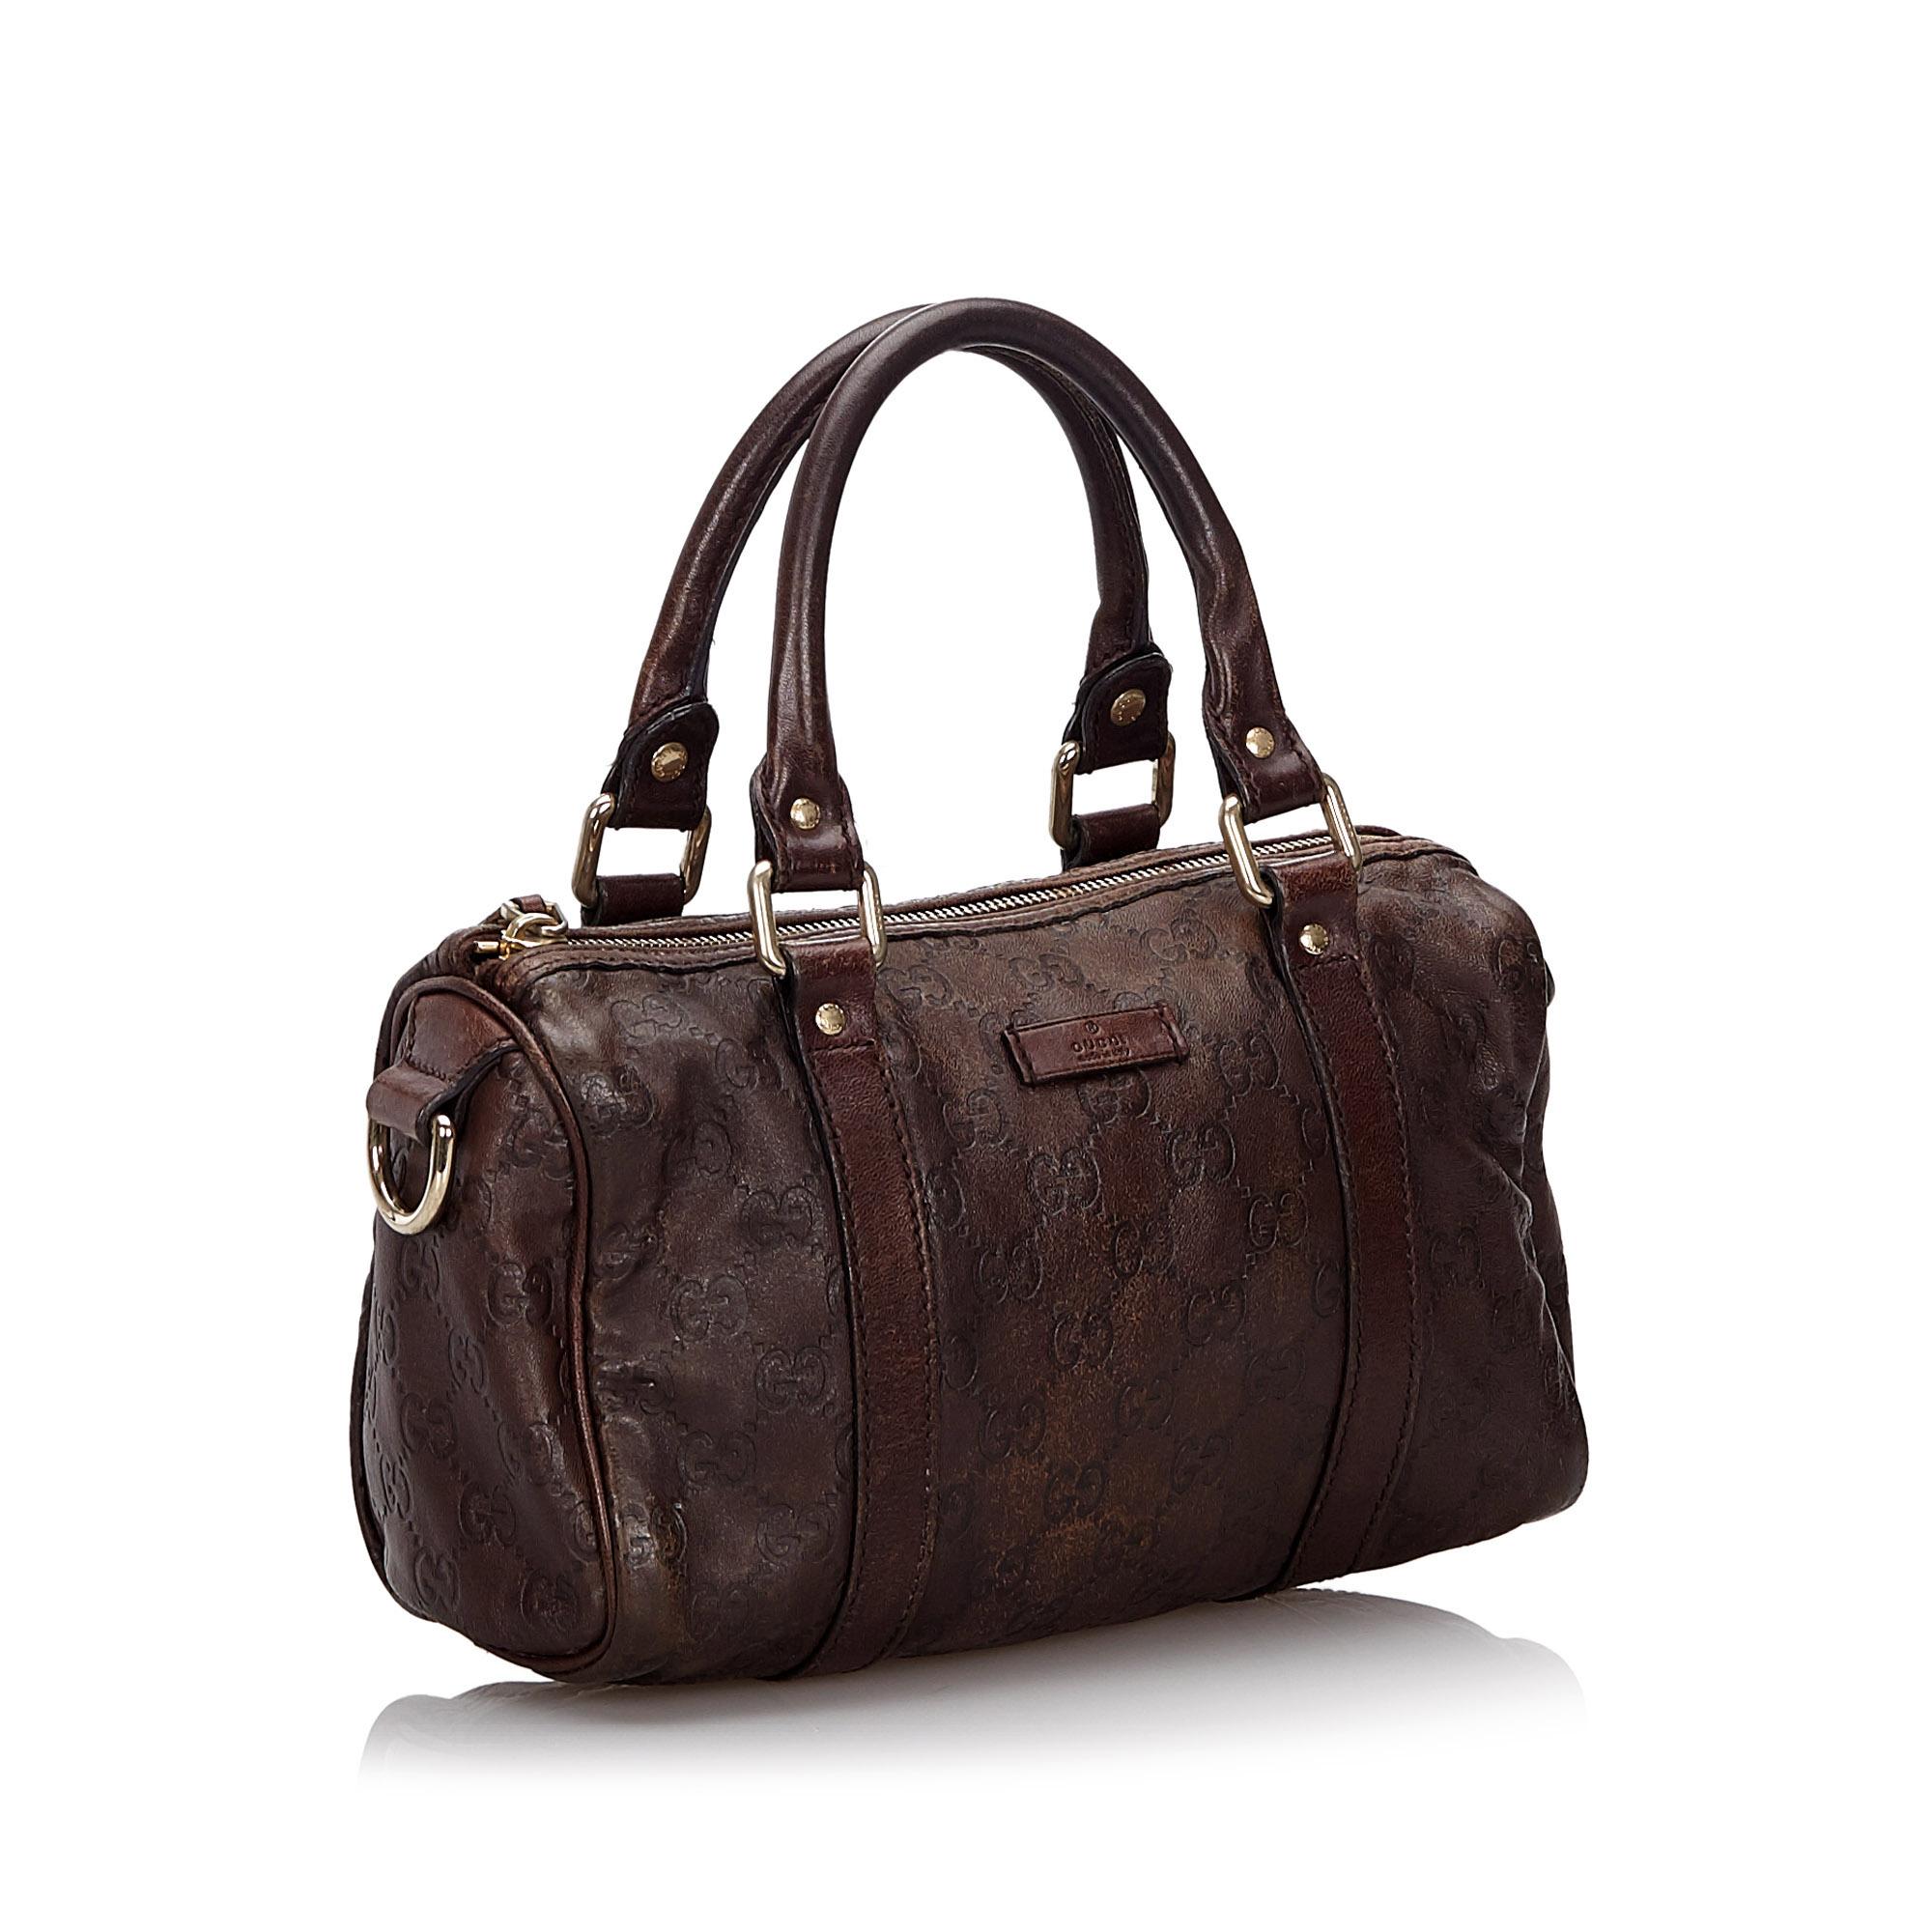 The Joy boston bag features a leather body, rolled leather handles, a top zip closure, and an interior zip pocket. It carries as B condition rating.

Inclusions: 
This item does not come with inclusions.

Dimensions:
Length: 16.00 cm
Width: 25.00